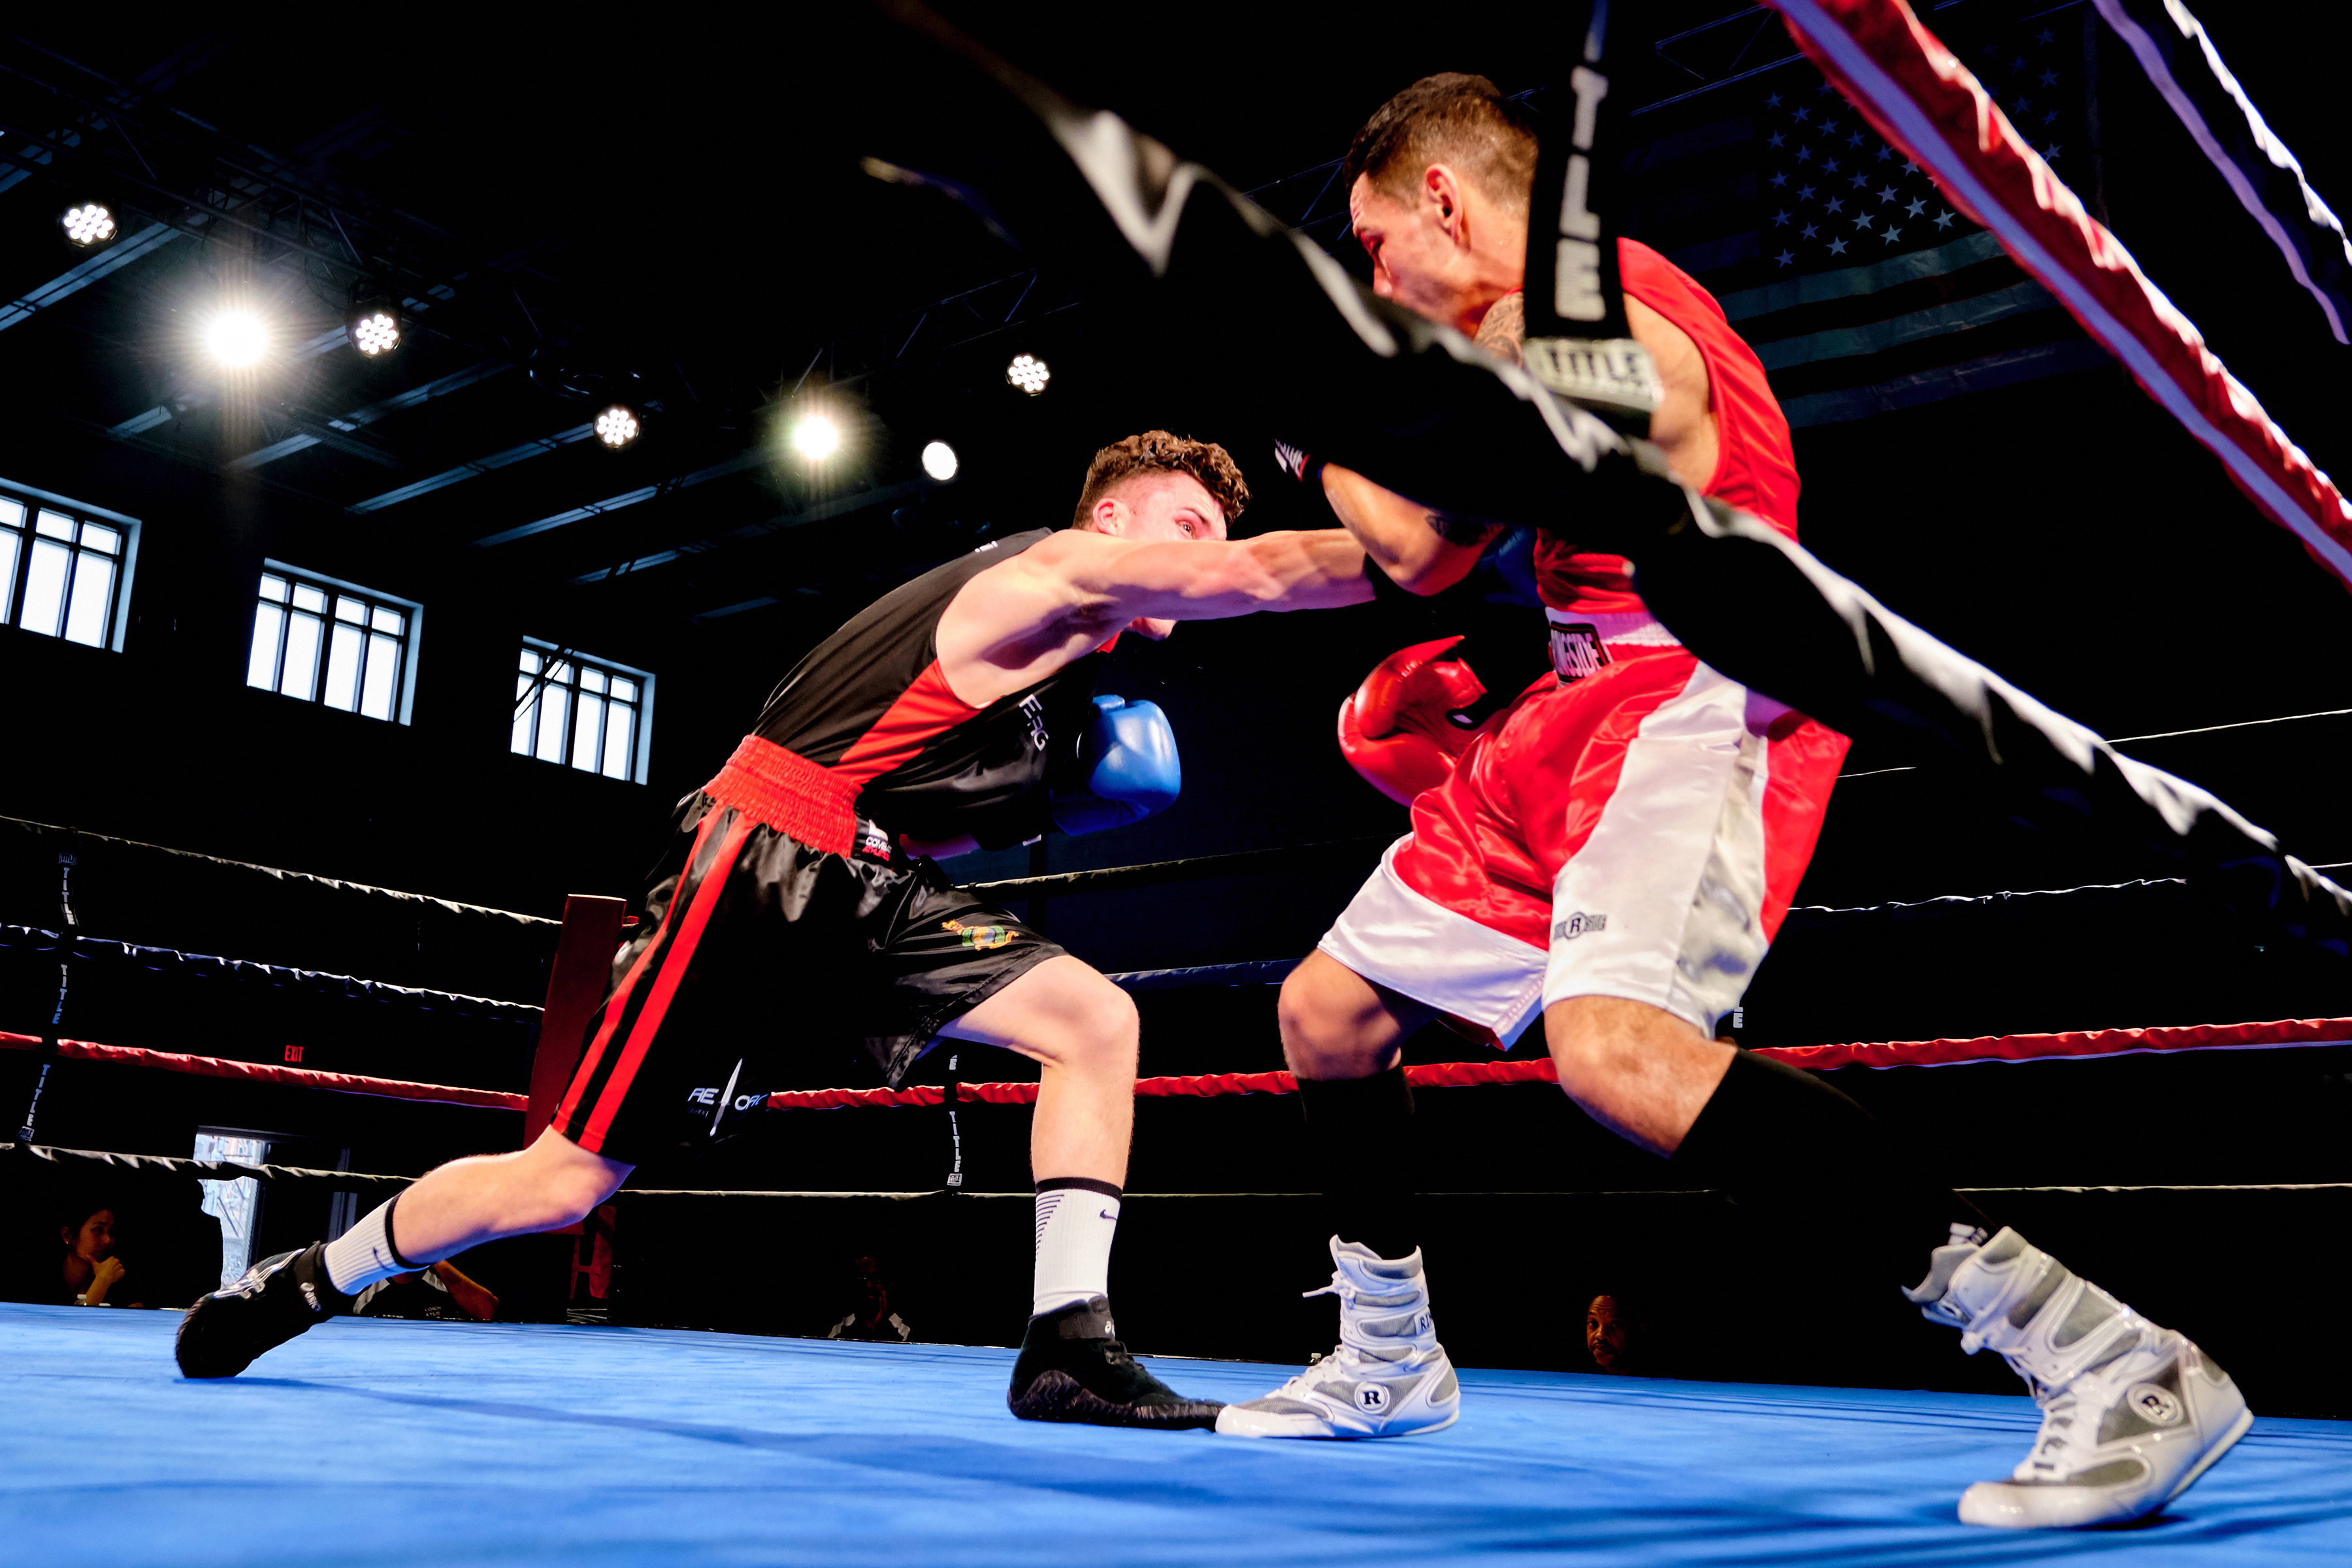 Royal Marines retain boxing title after thriller